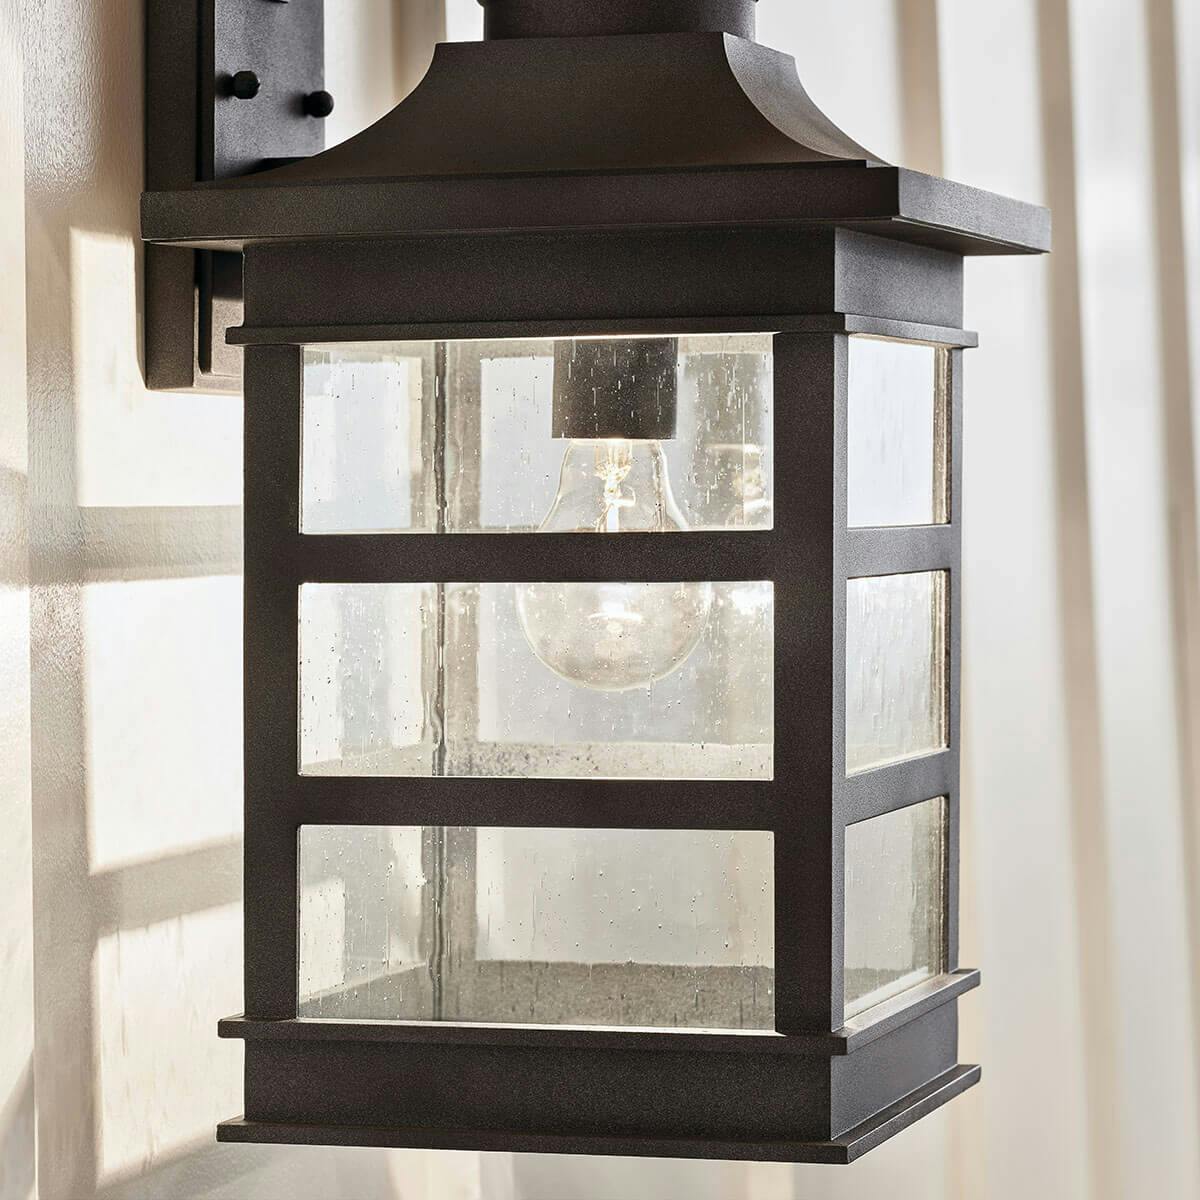 Day time outdoor entryway image featuring Grand Ridge outdoor wall light 39537